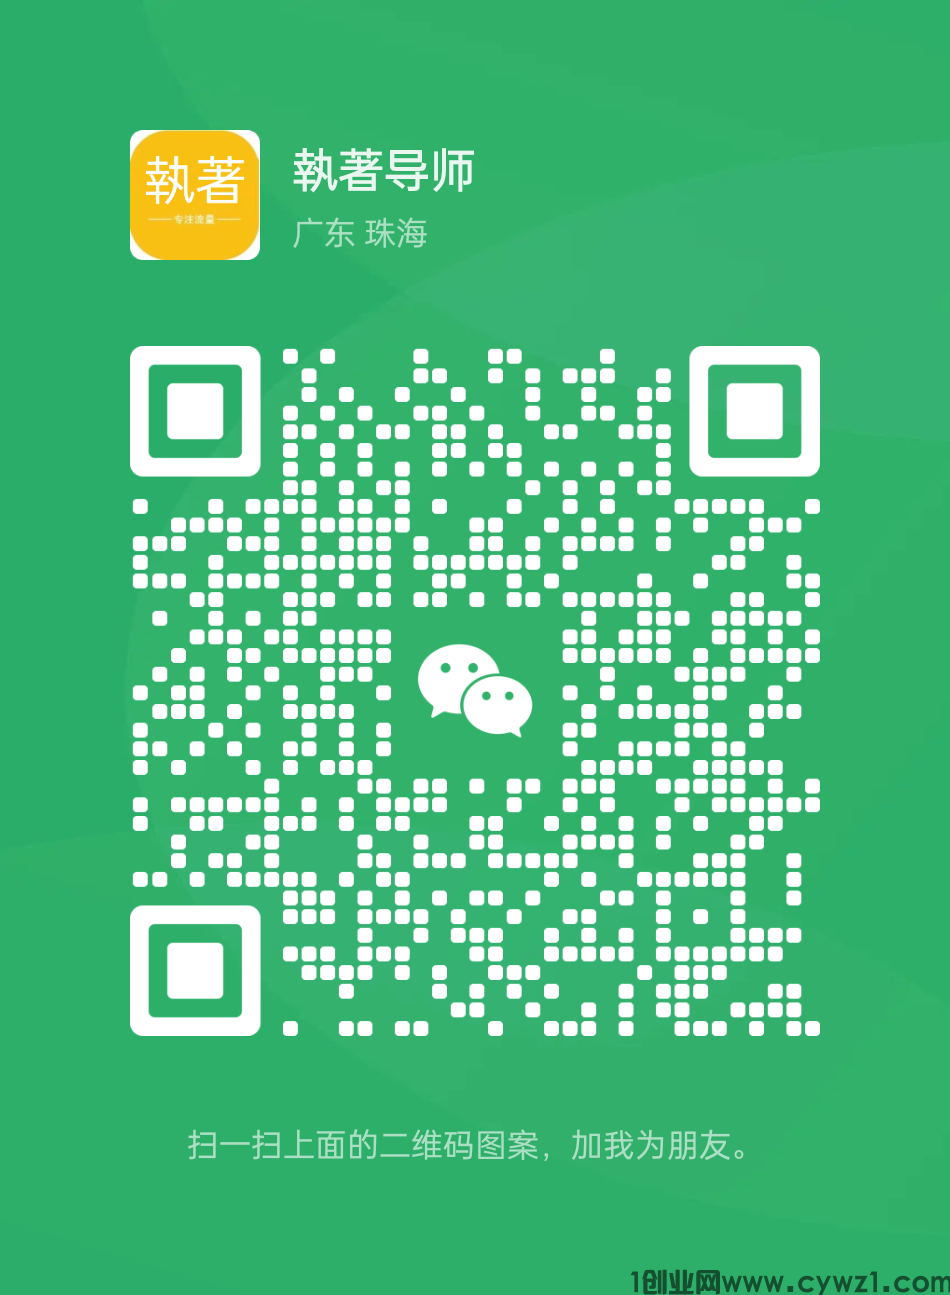 mmqrcode1684513065632.png